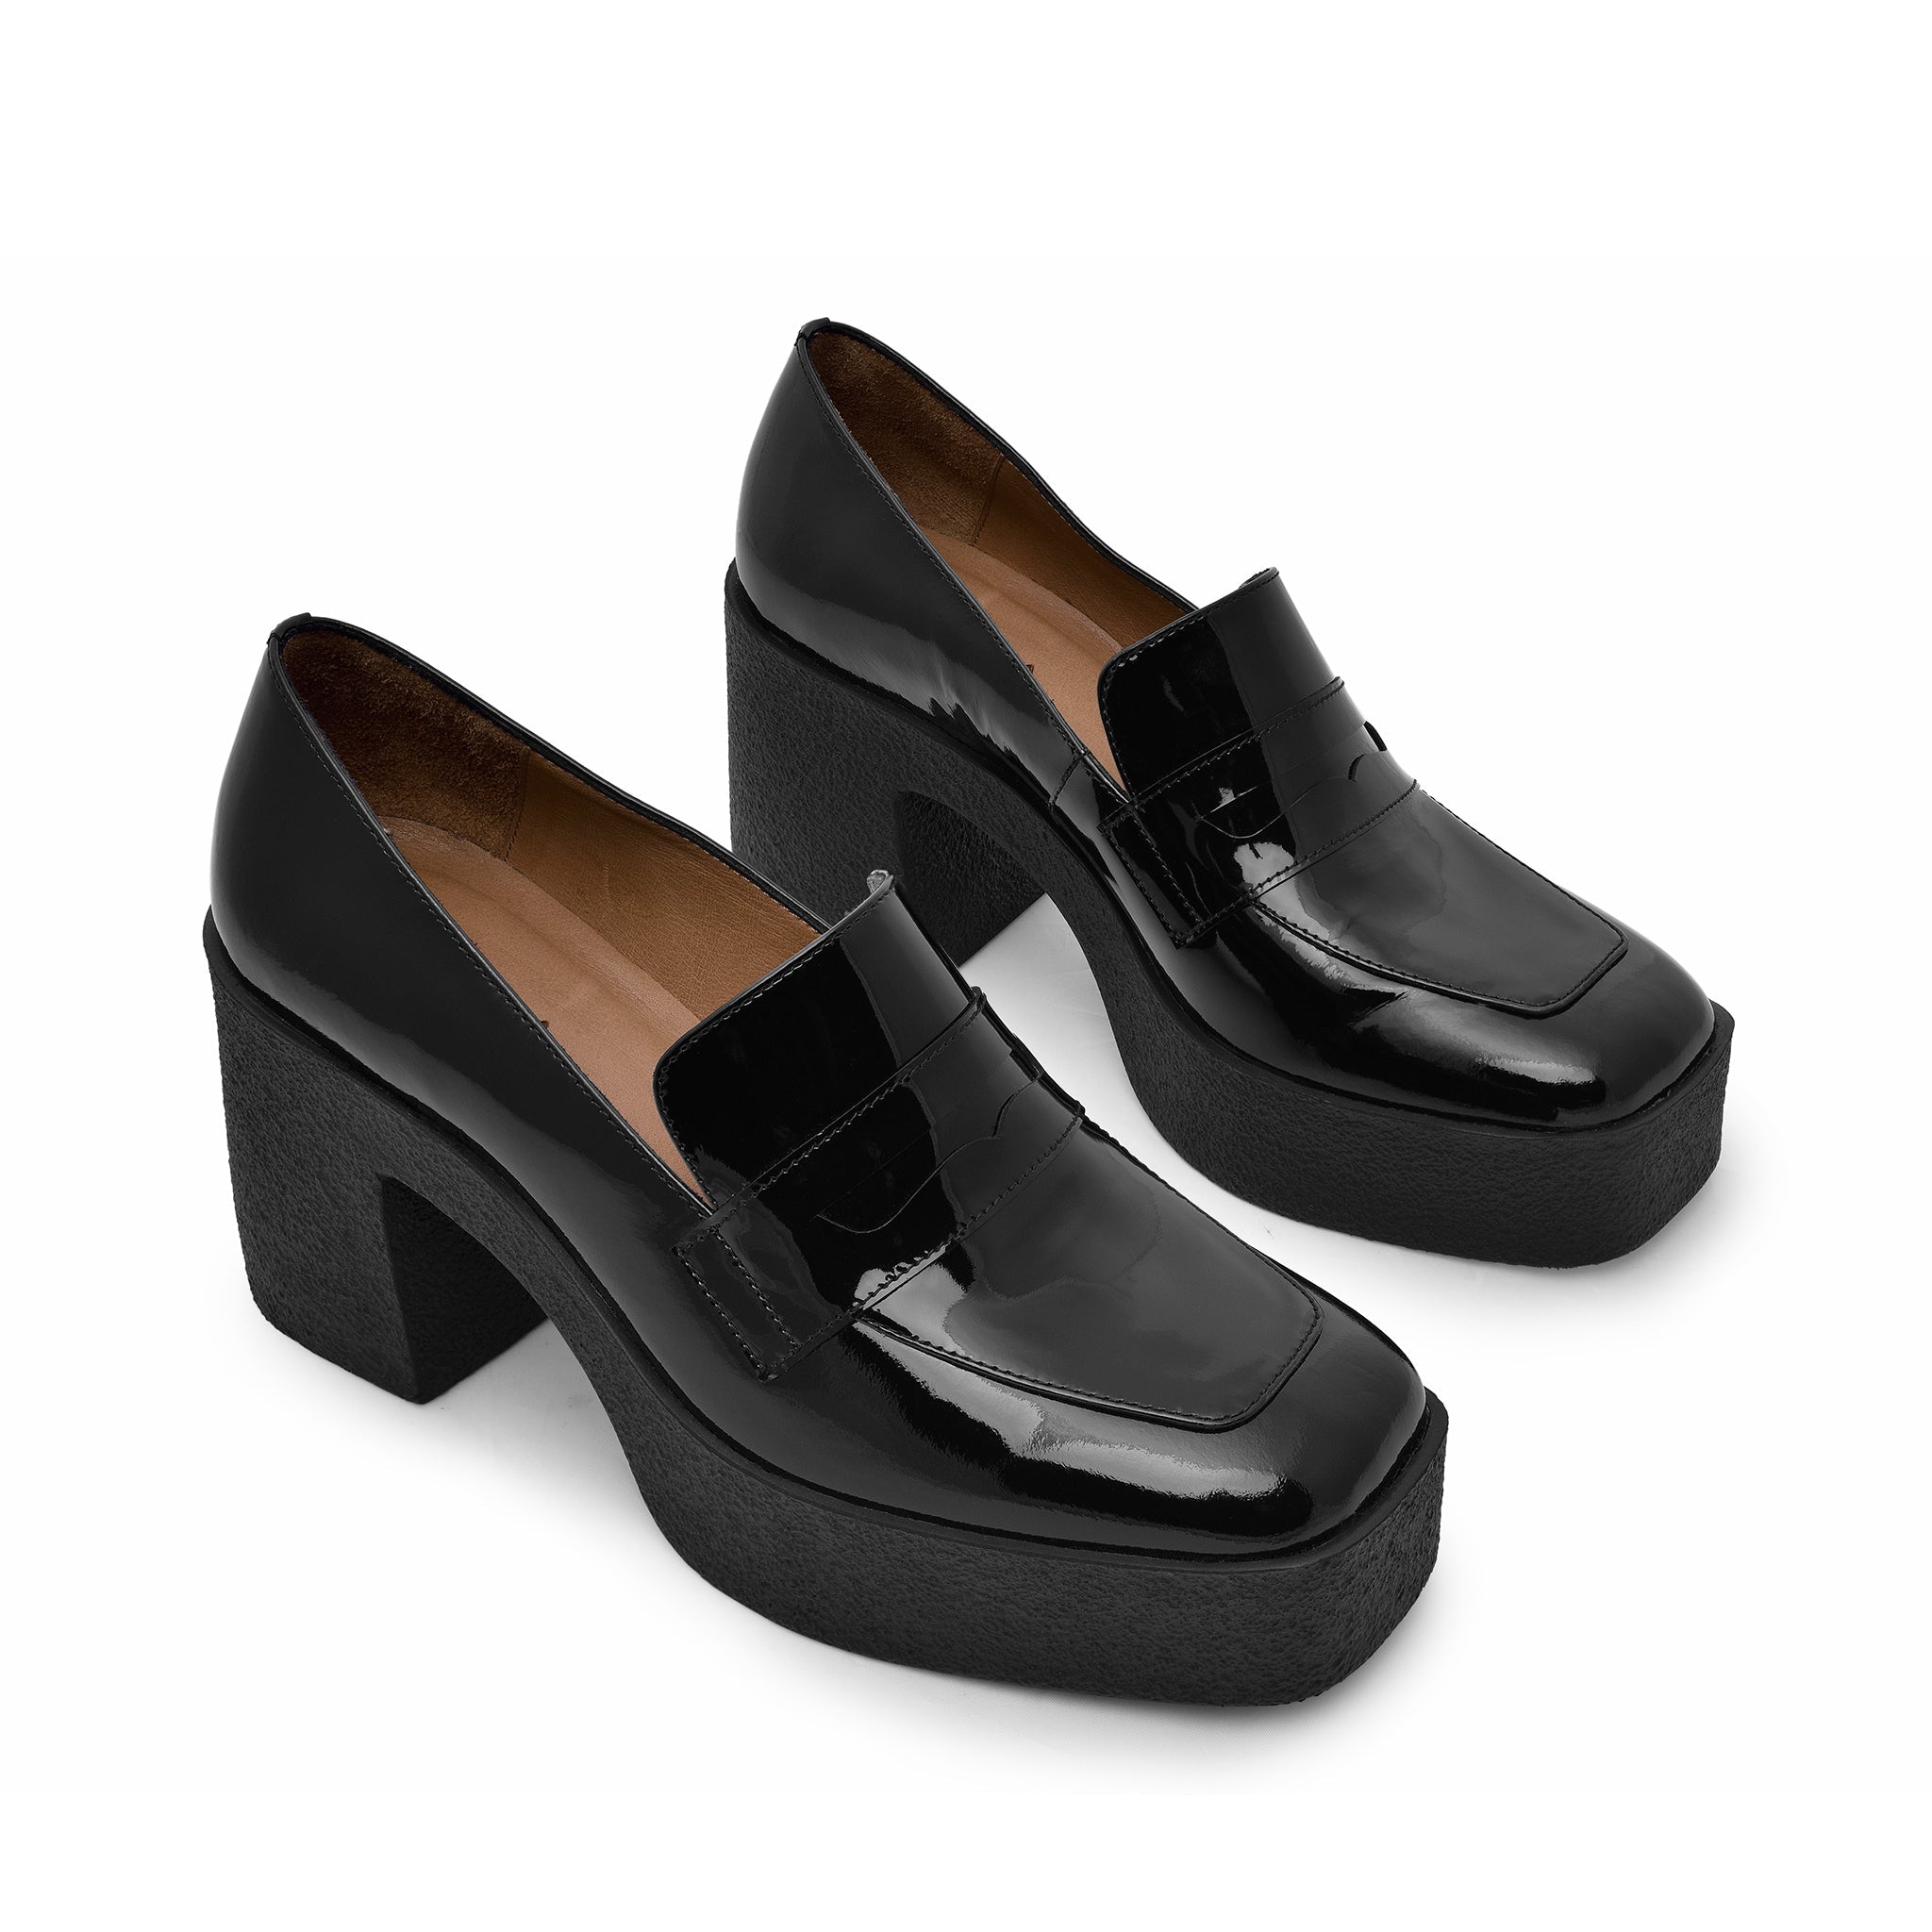 Yoko Black Patent Leather Chunky Loafers 21031-01-02 - 3